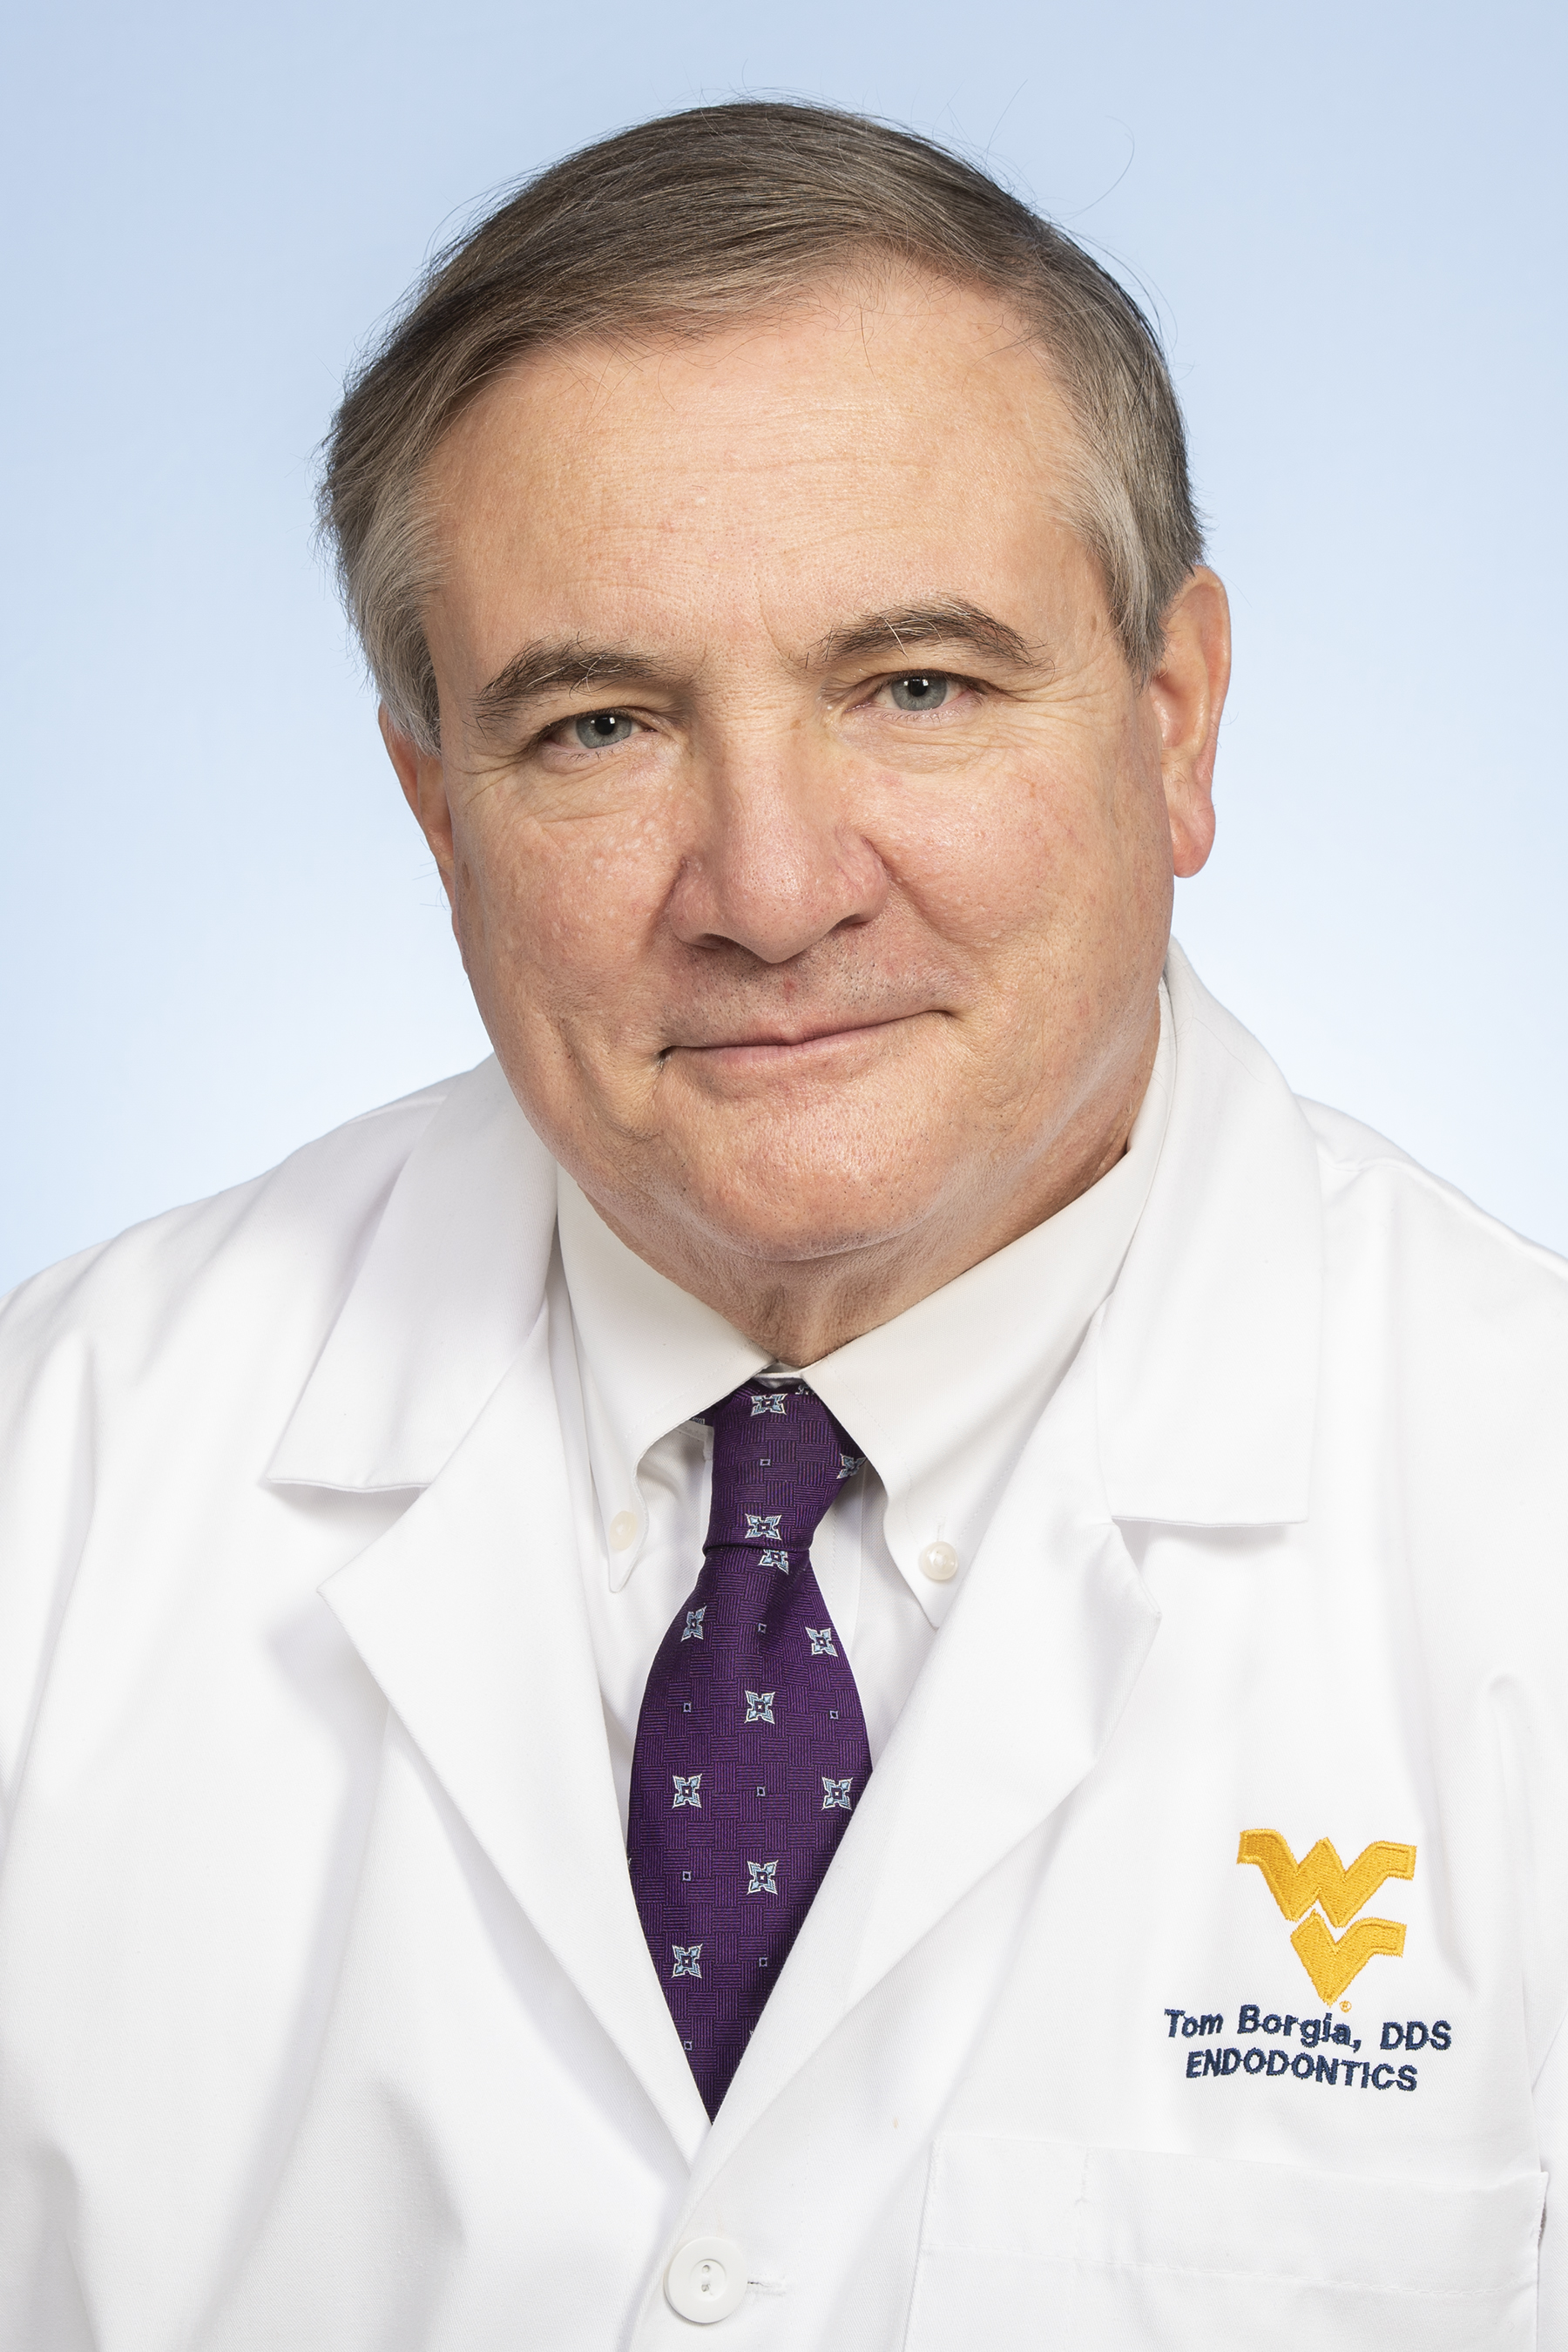 Dr. Anthony Tom Borgia was the WVU dental school dean for 5 years after being a chair and professor.